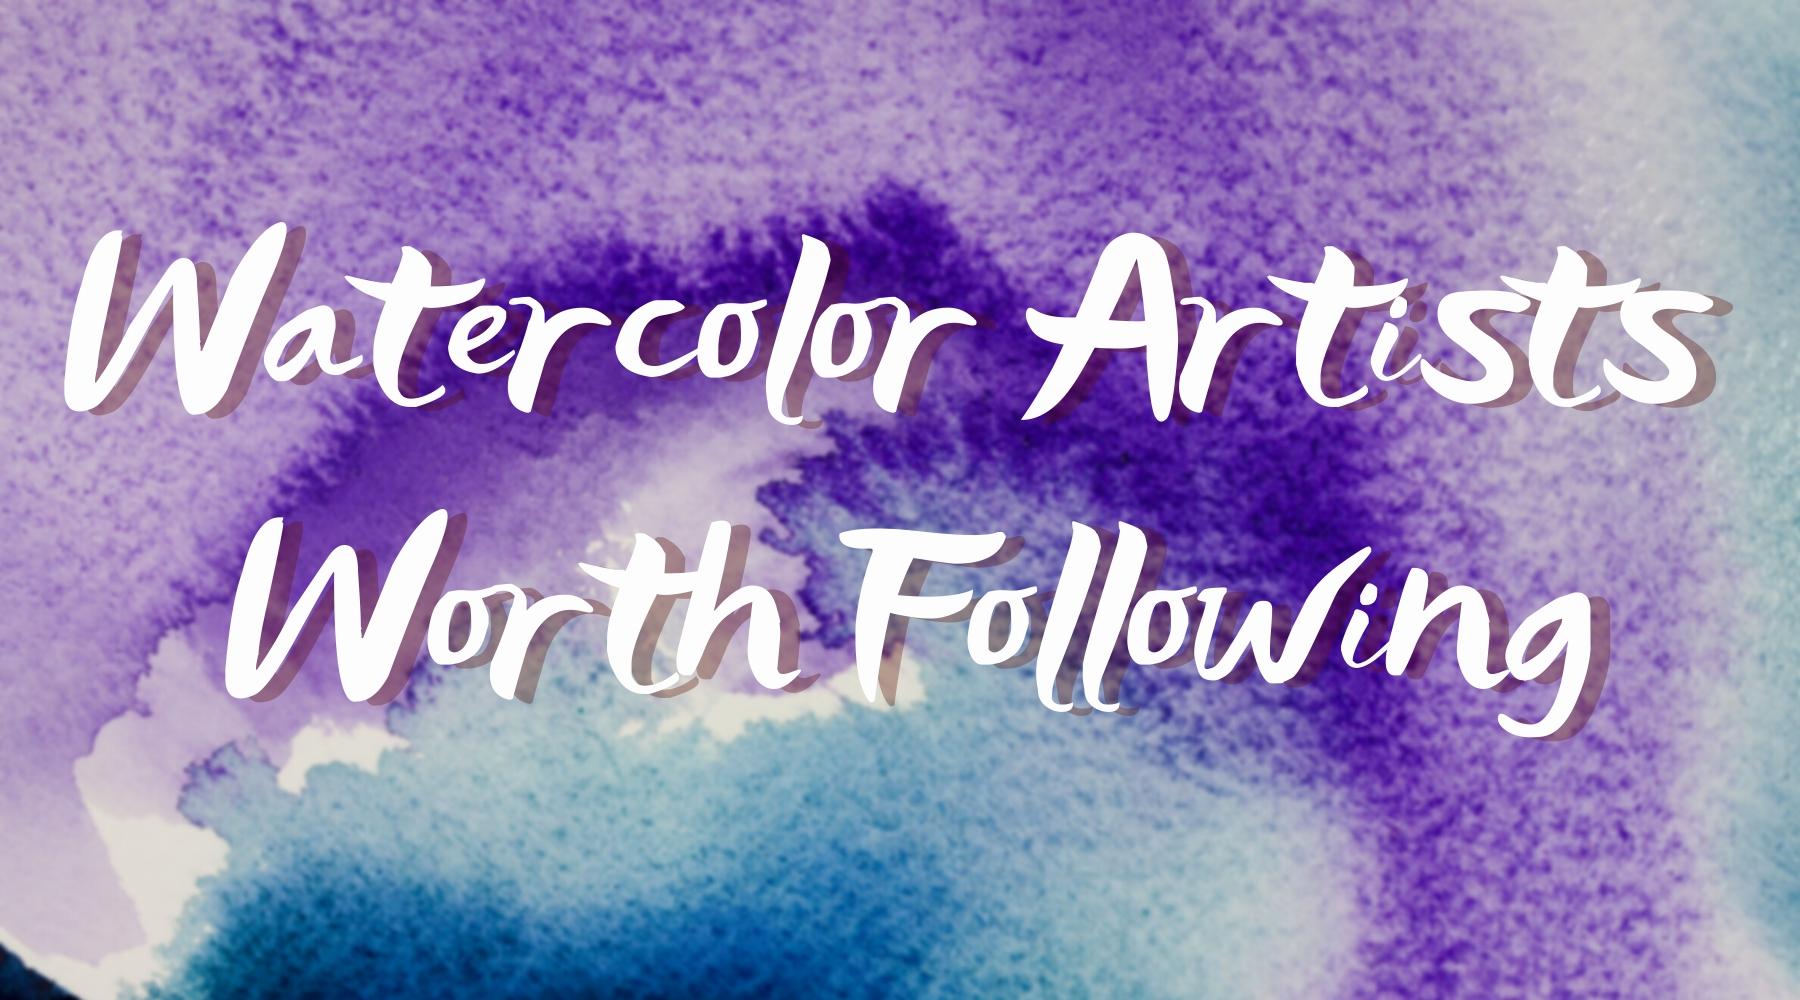 Watercolor Artists Worth Following